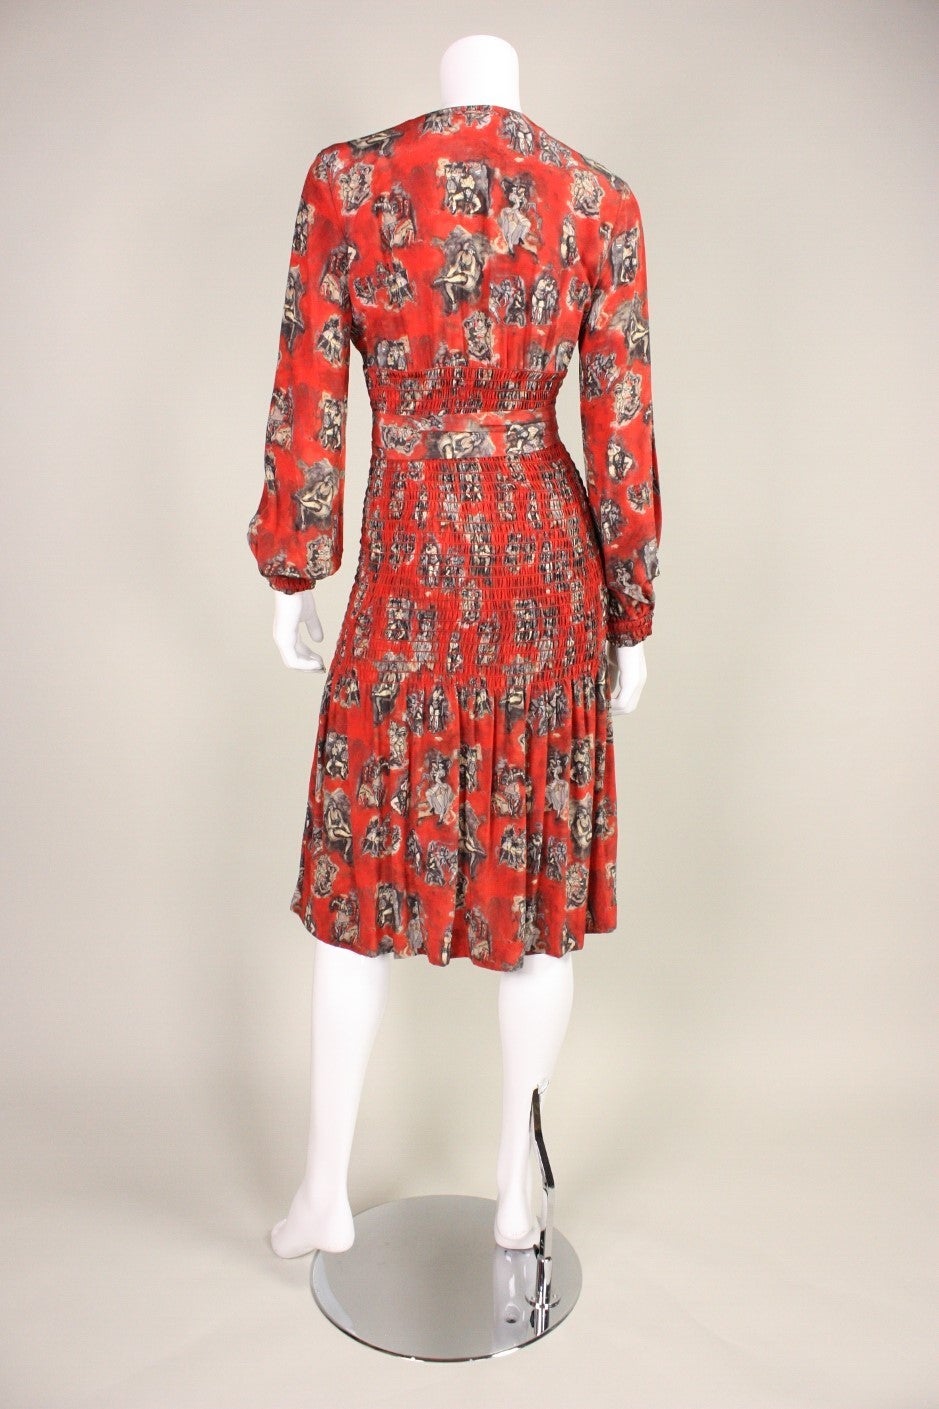 VIntage Jean Paul Gaultier Dress with Burlesque Print In Excellent Condition For Sale In Los Angeles, CA